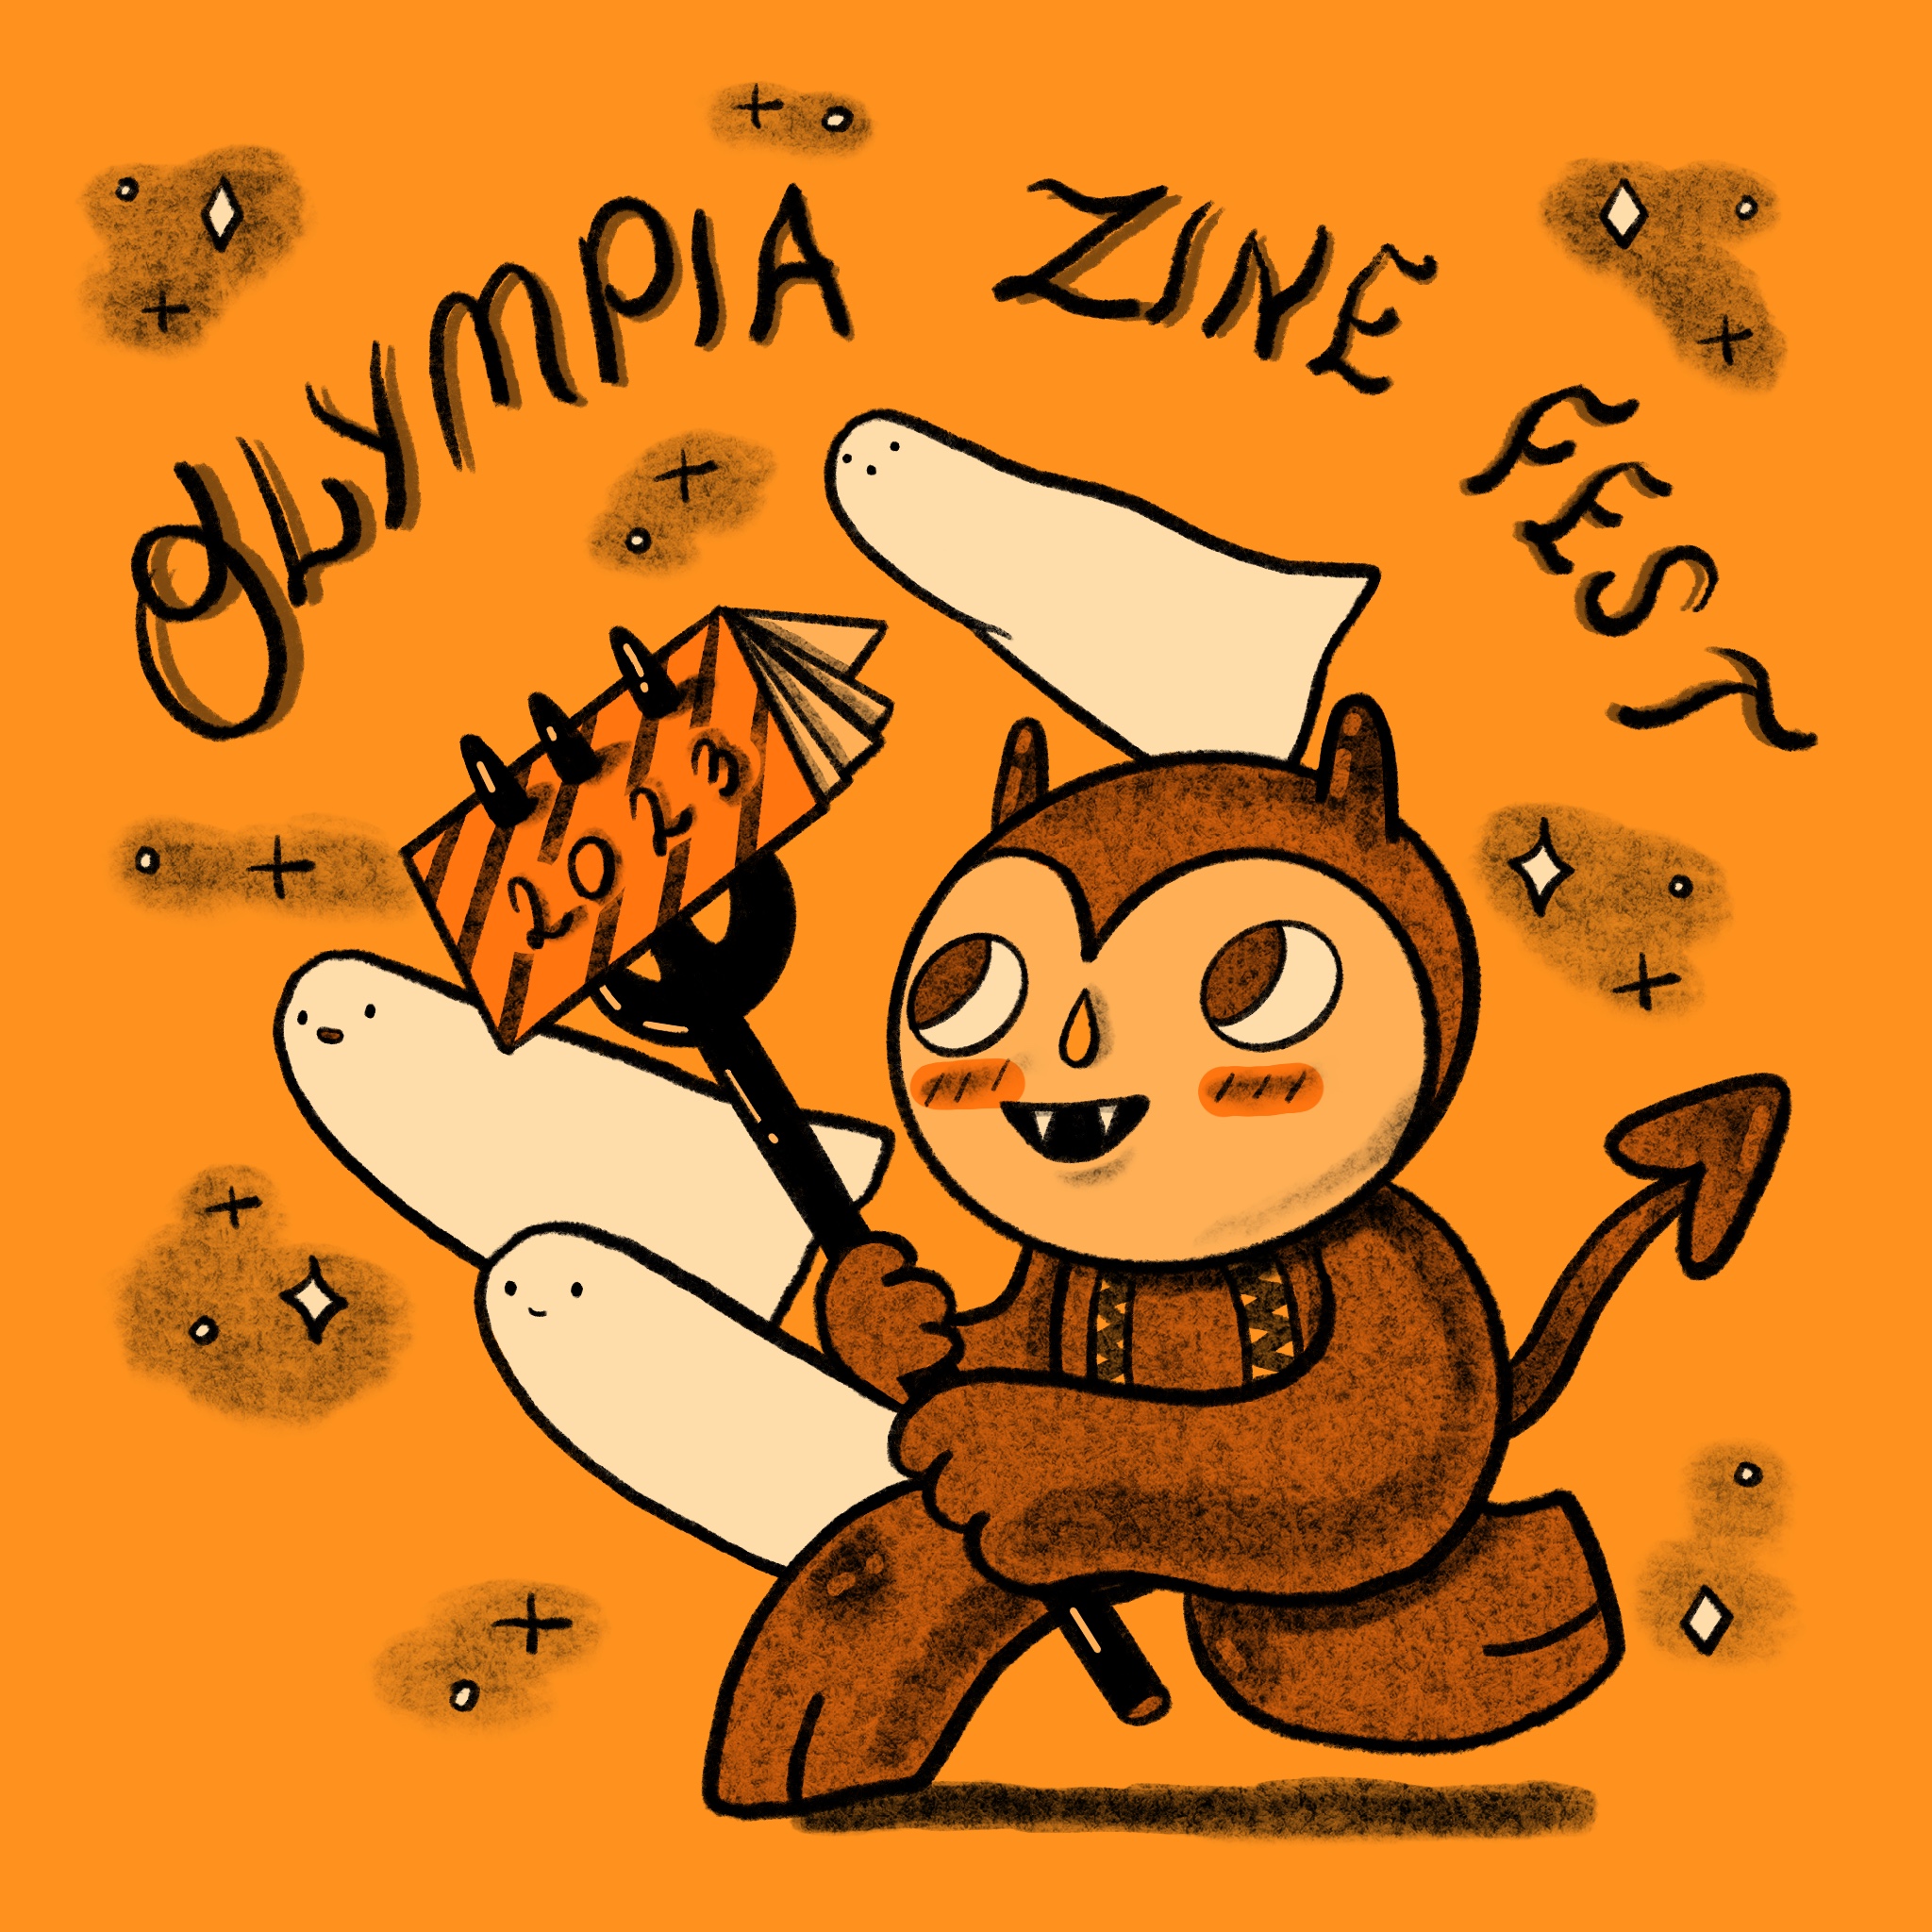 An illustration of a smiling devil holding a trident with the prongs poked through a zine that says "2023." Three ghosts surround the devil. Text at the top of the image says "Olympia Zine Fest."